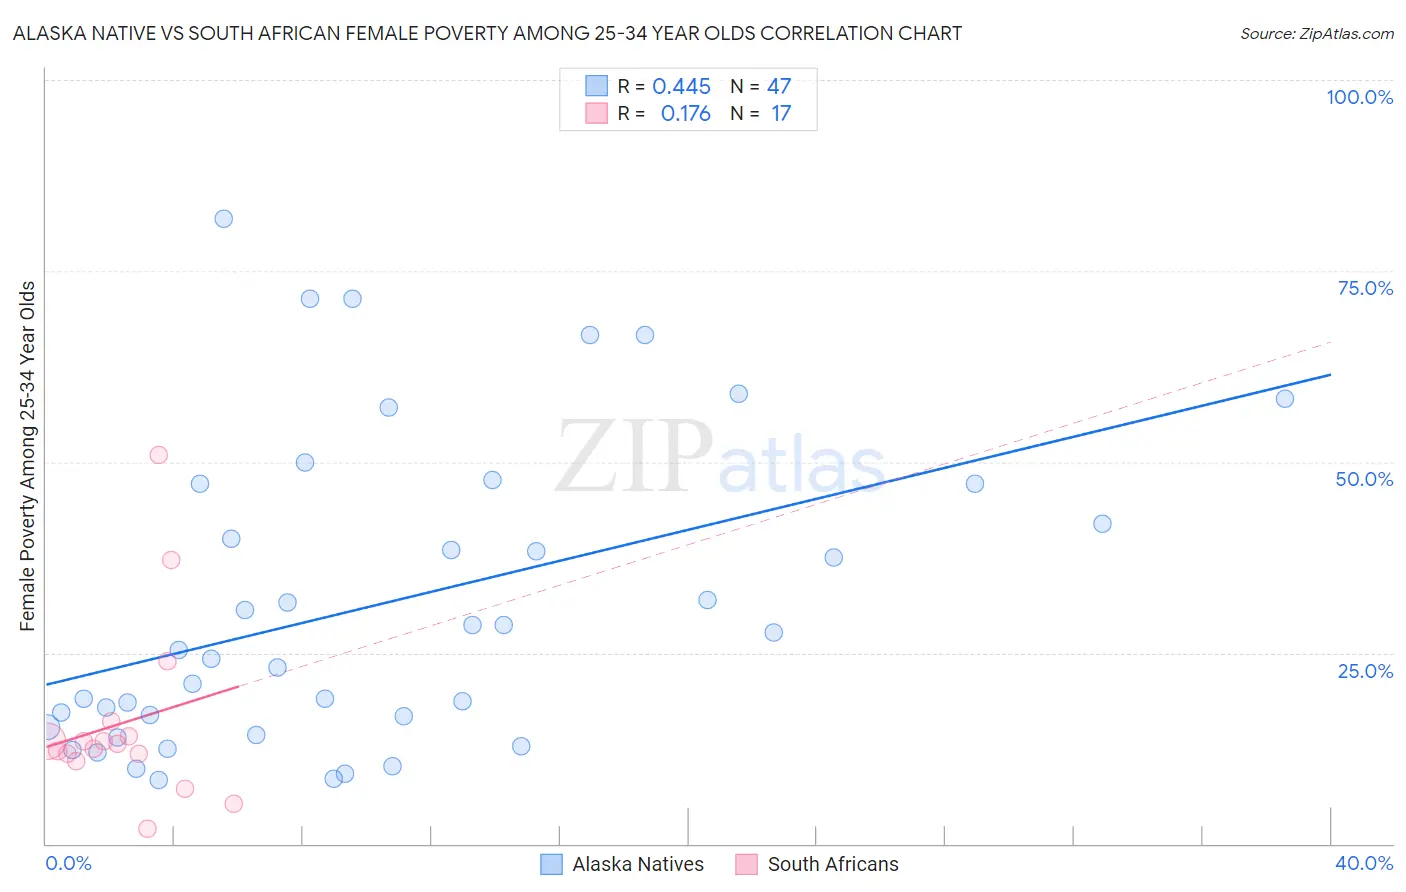 Alaska Native vs South African Female Poverty Among 25-34 Year Olds